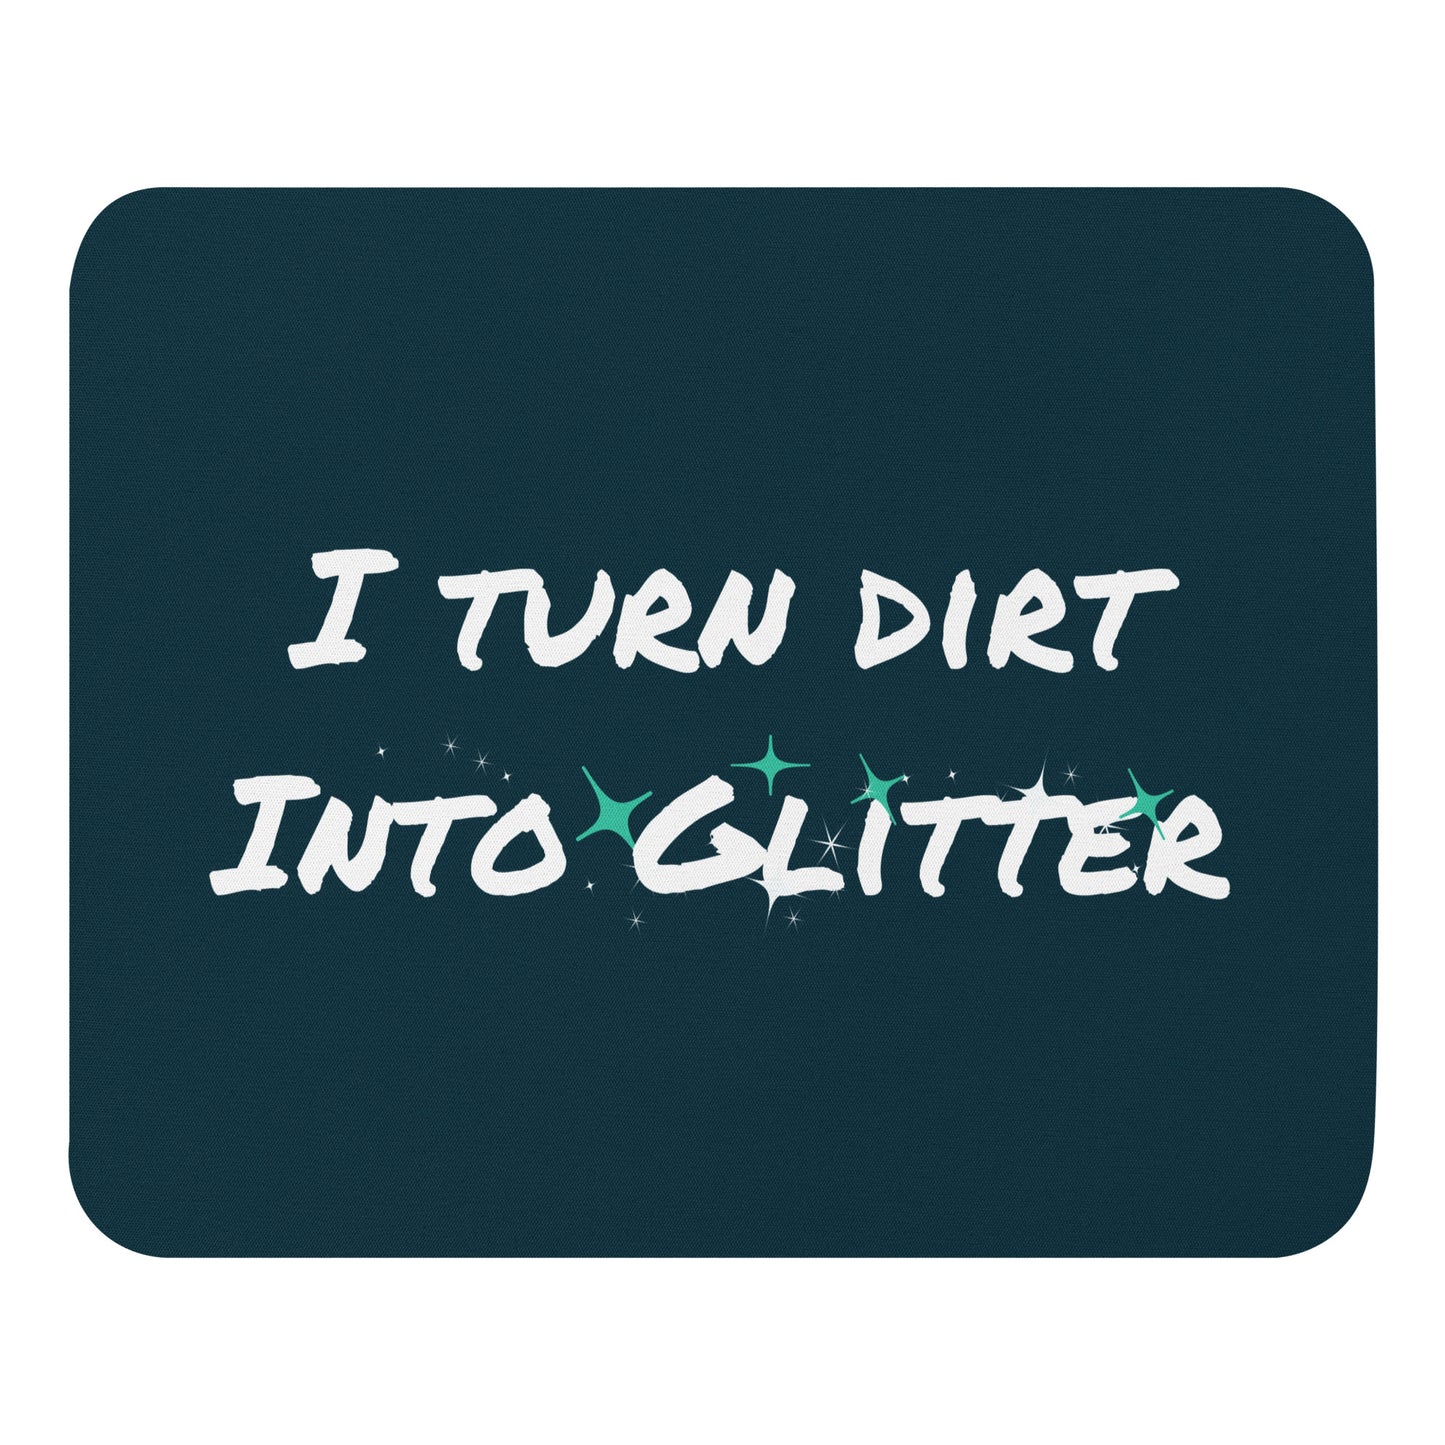 I Turn Dirt Into Glitter Talent Takeover Unfiltered Podcast Mouse pad